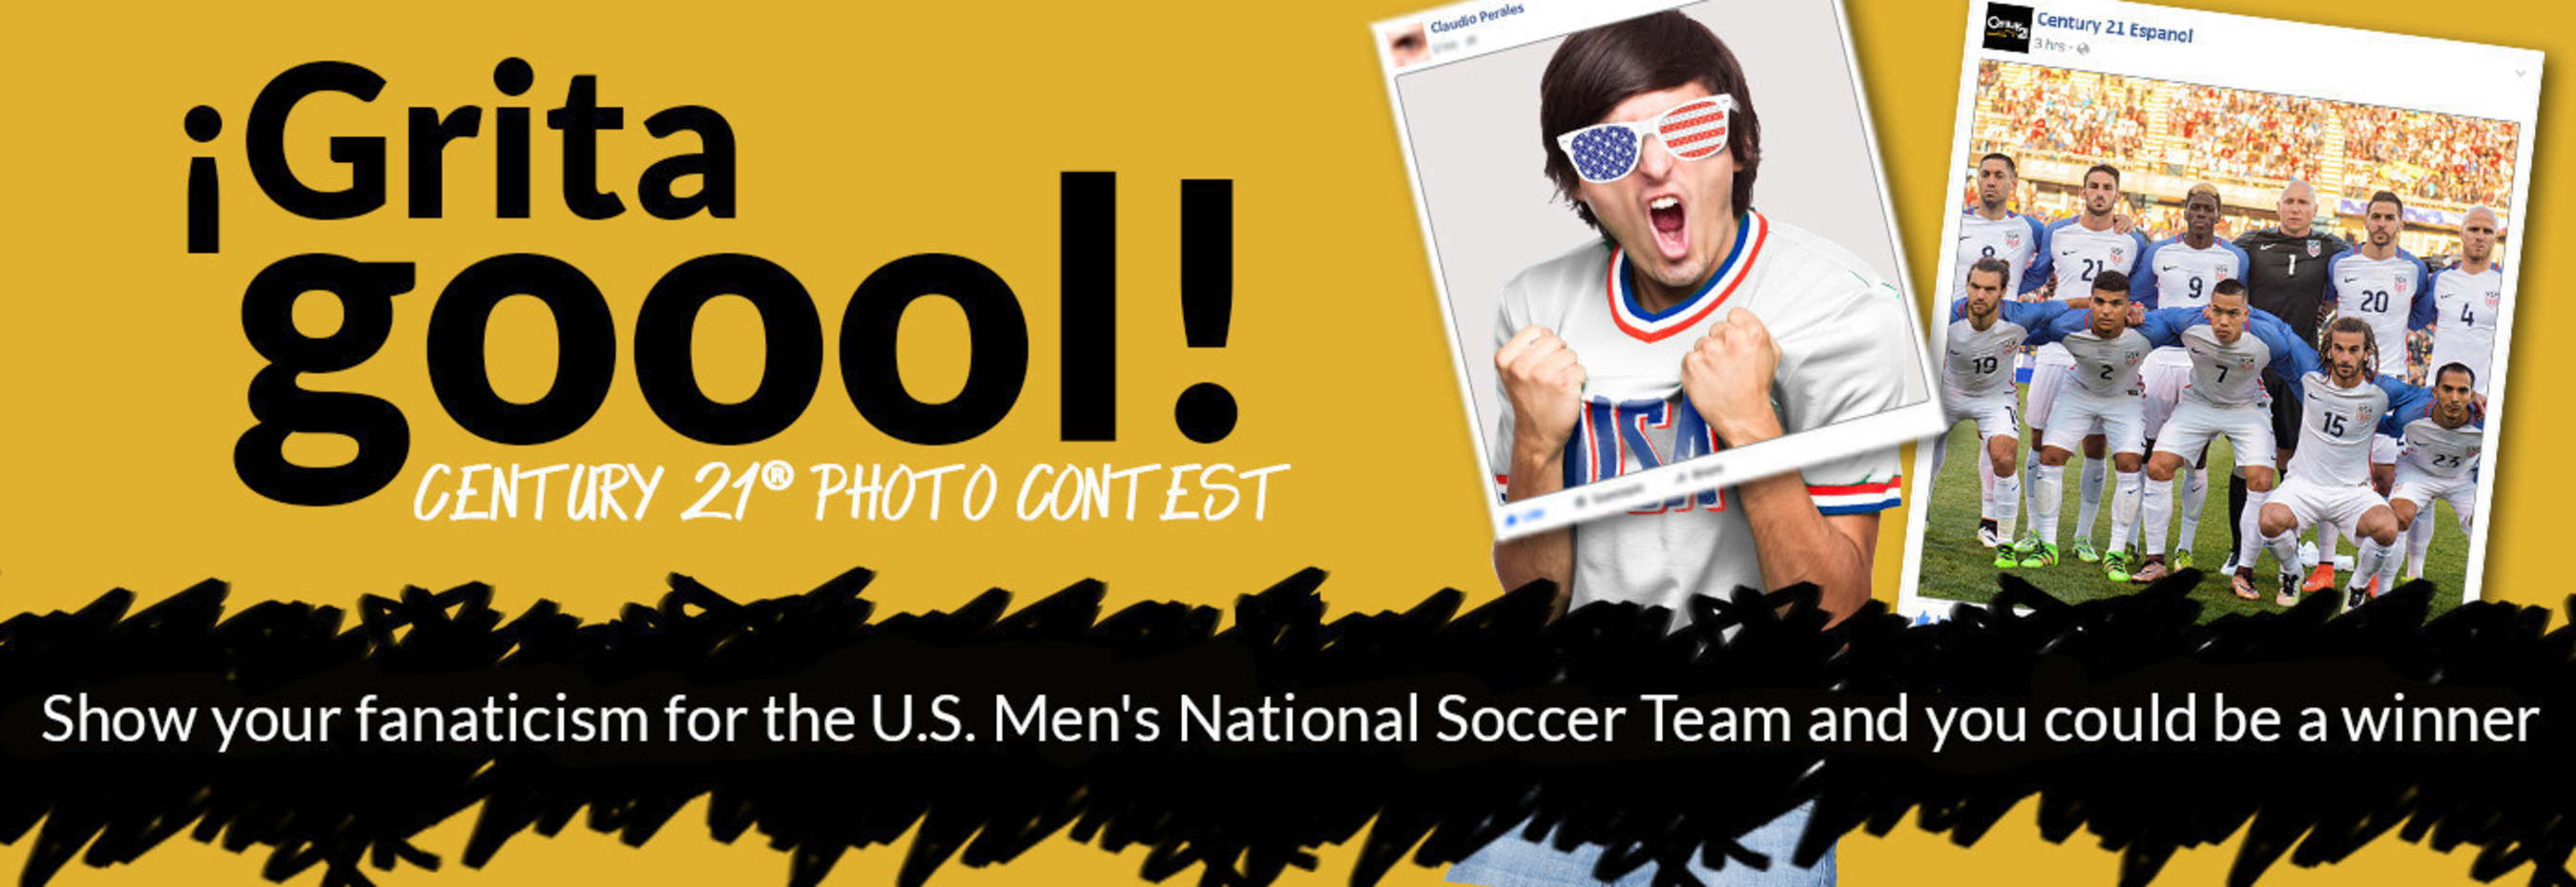 CENTURY 21(R) rewards the fanaticism for the U.S. Men's National Soccer Team with a Photo Contest on Century 21 Espanol Facebook page